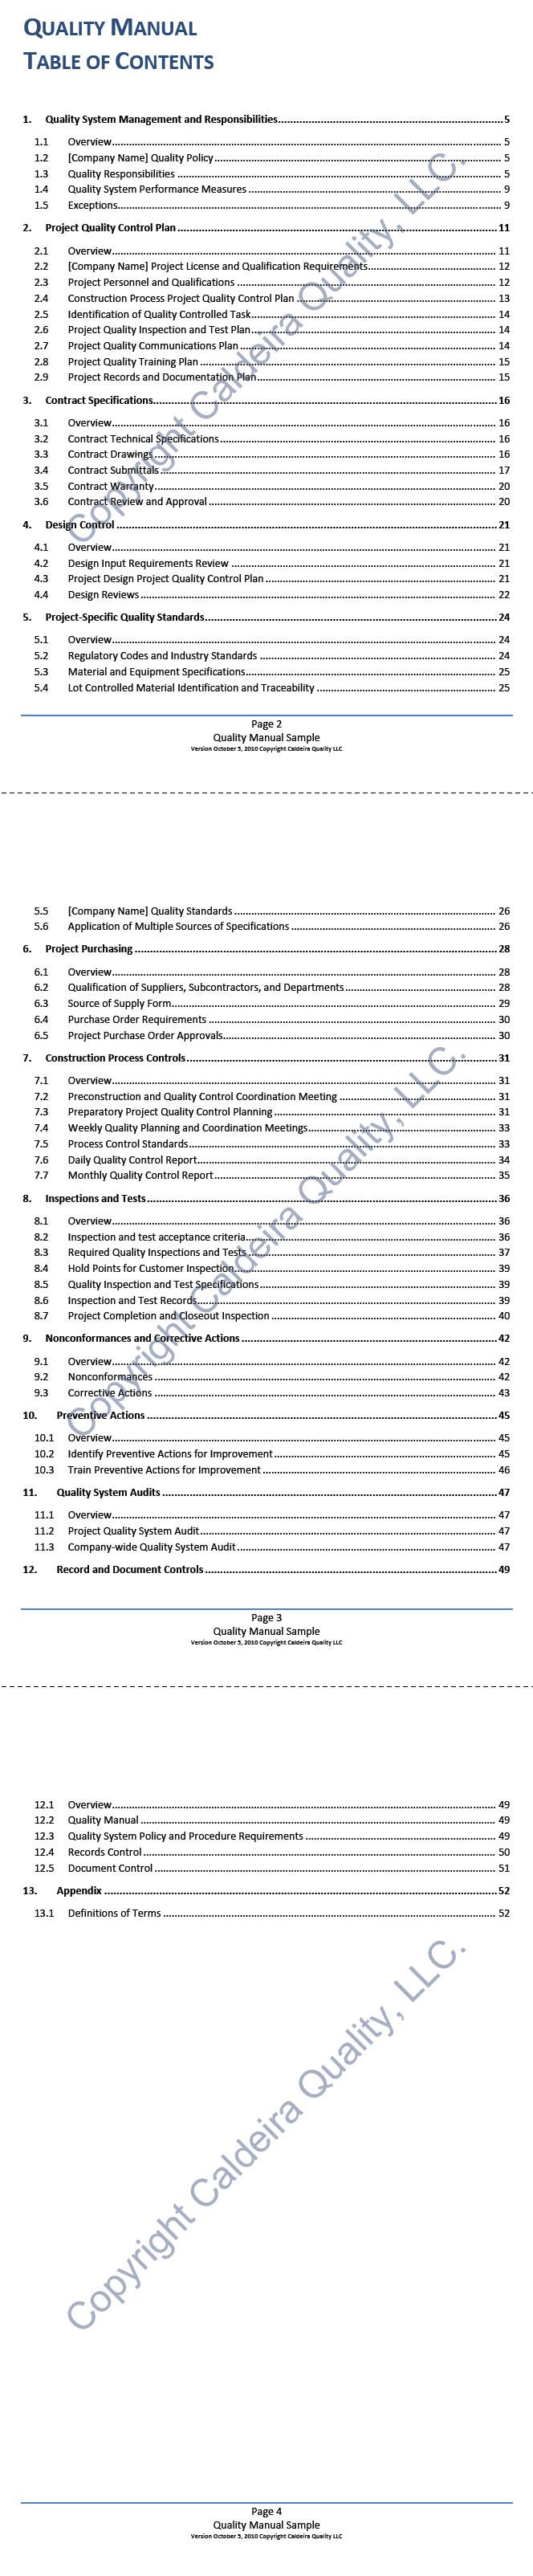 Quality Manual Table of Contents